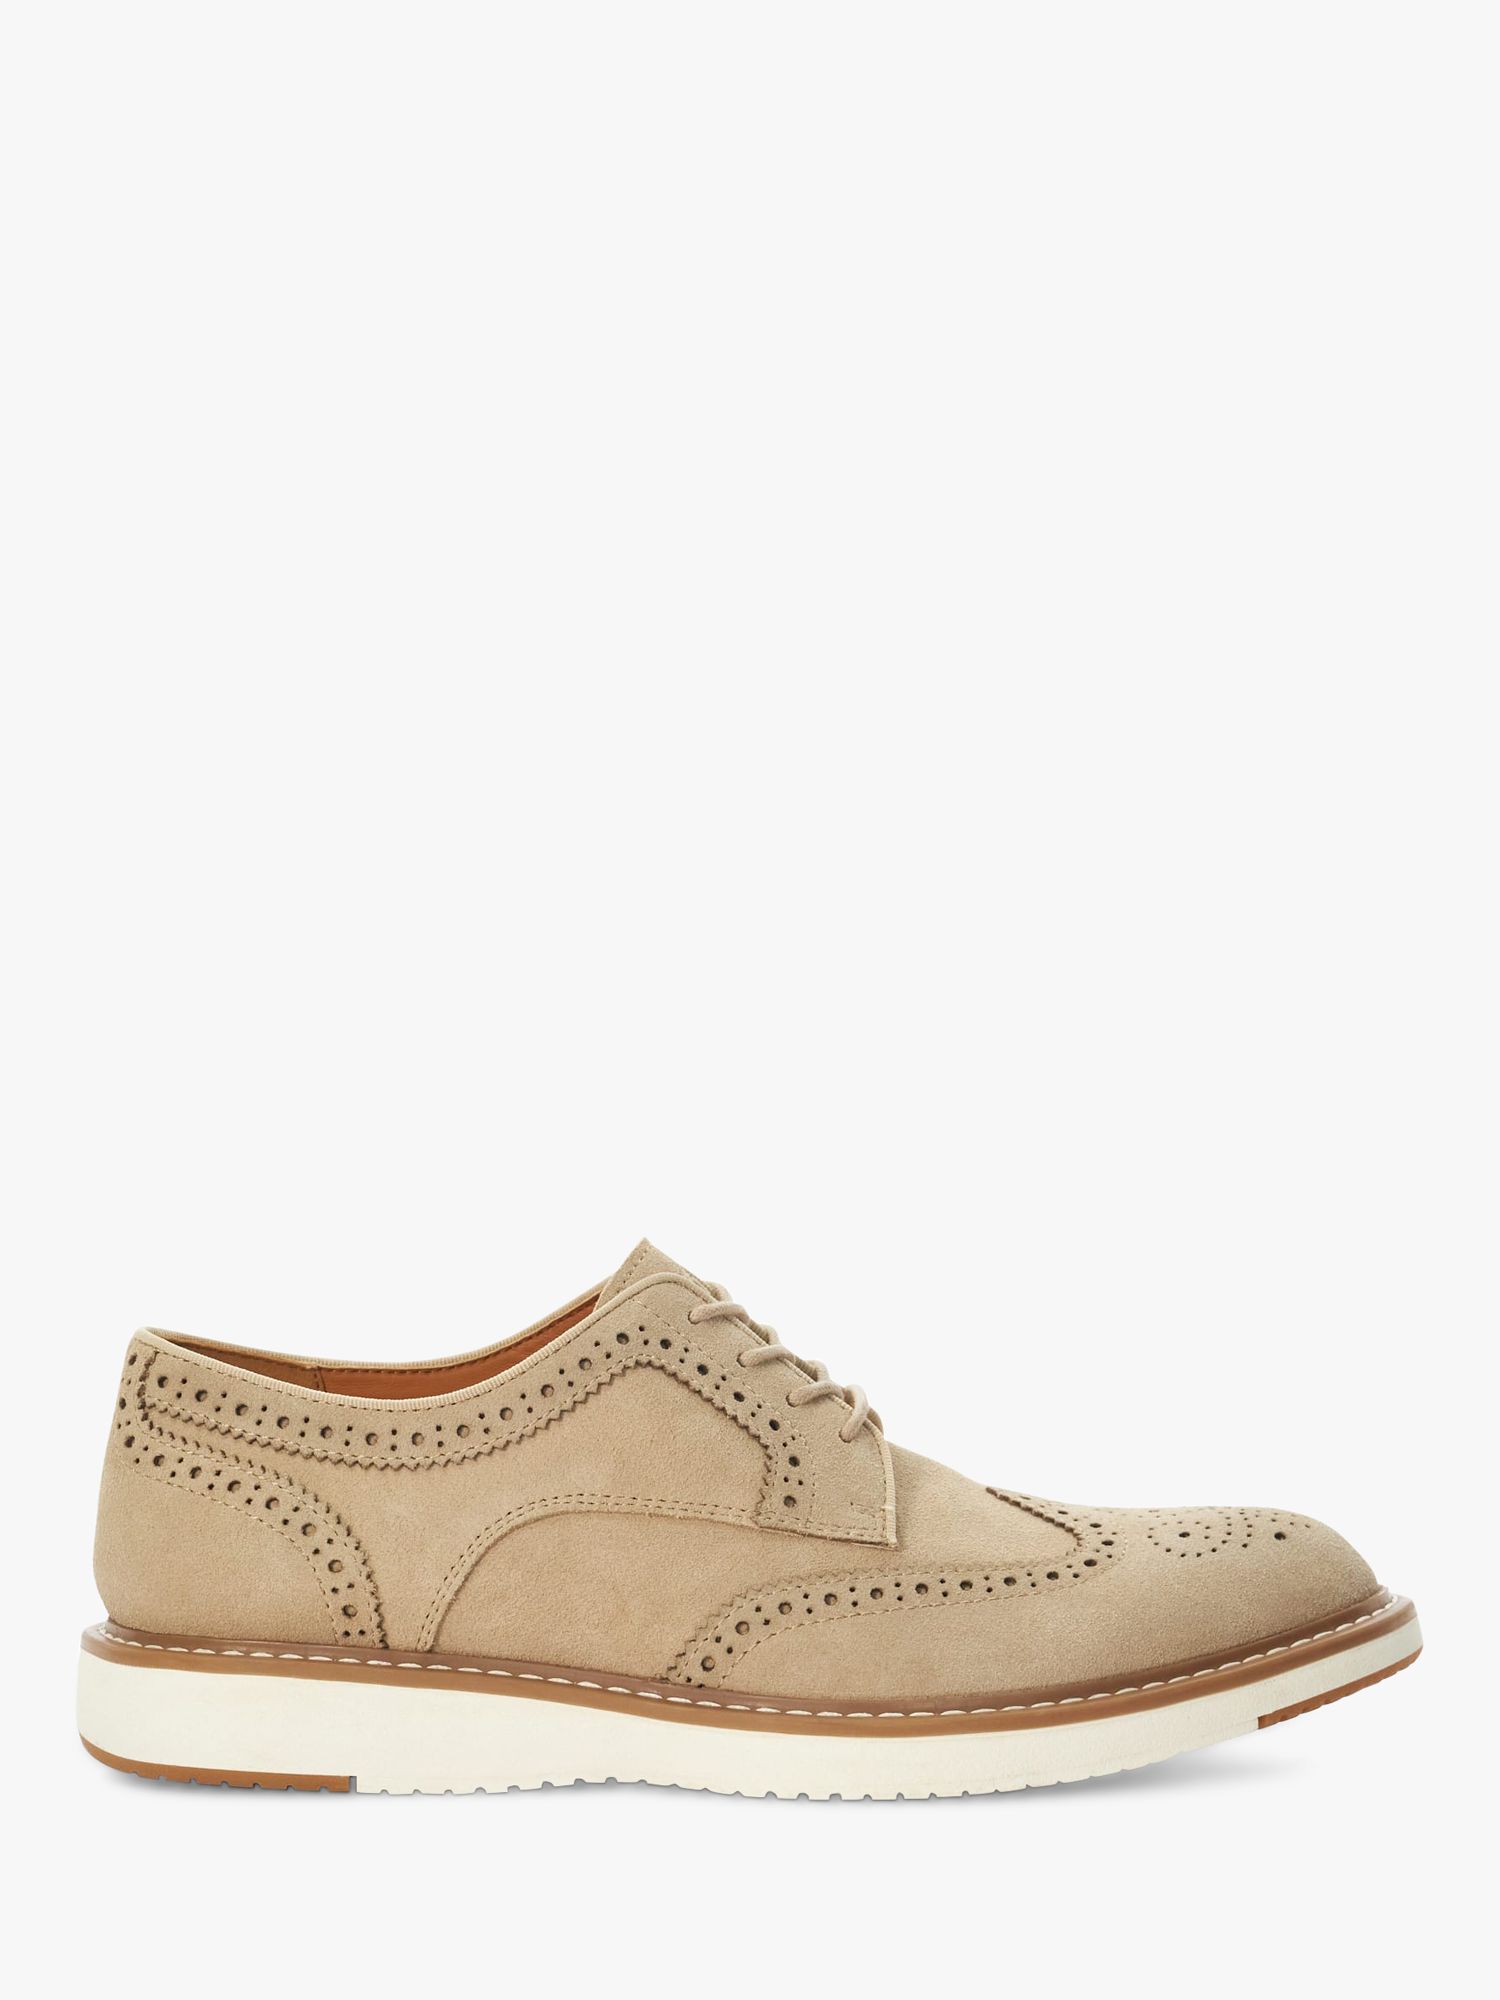 Dune Bronny Suede Brouge Lace Up Shoes, Sand, 11